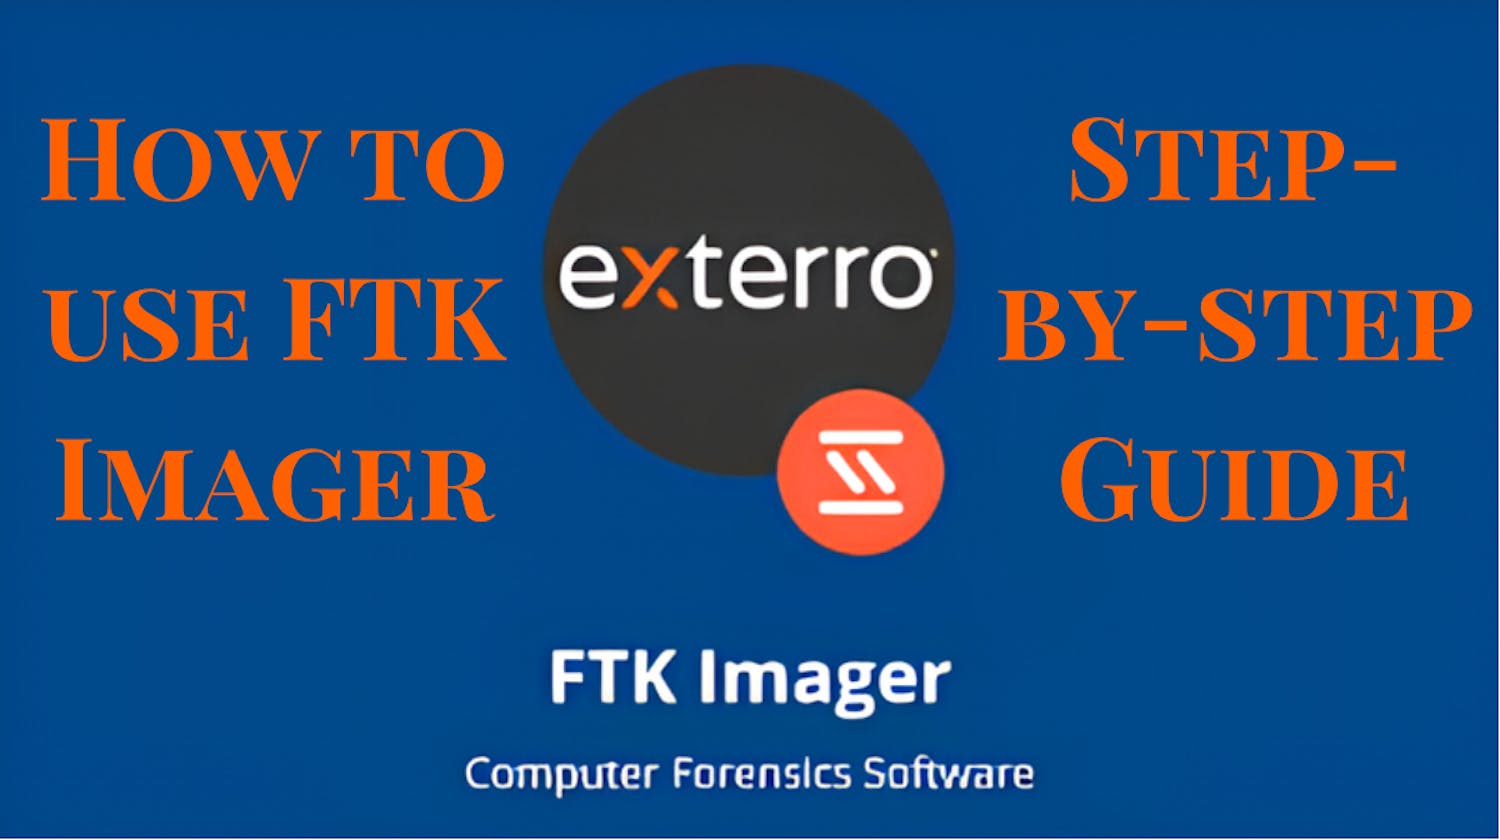 How to Use FTK Imager: A Step-by-Step Guide